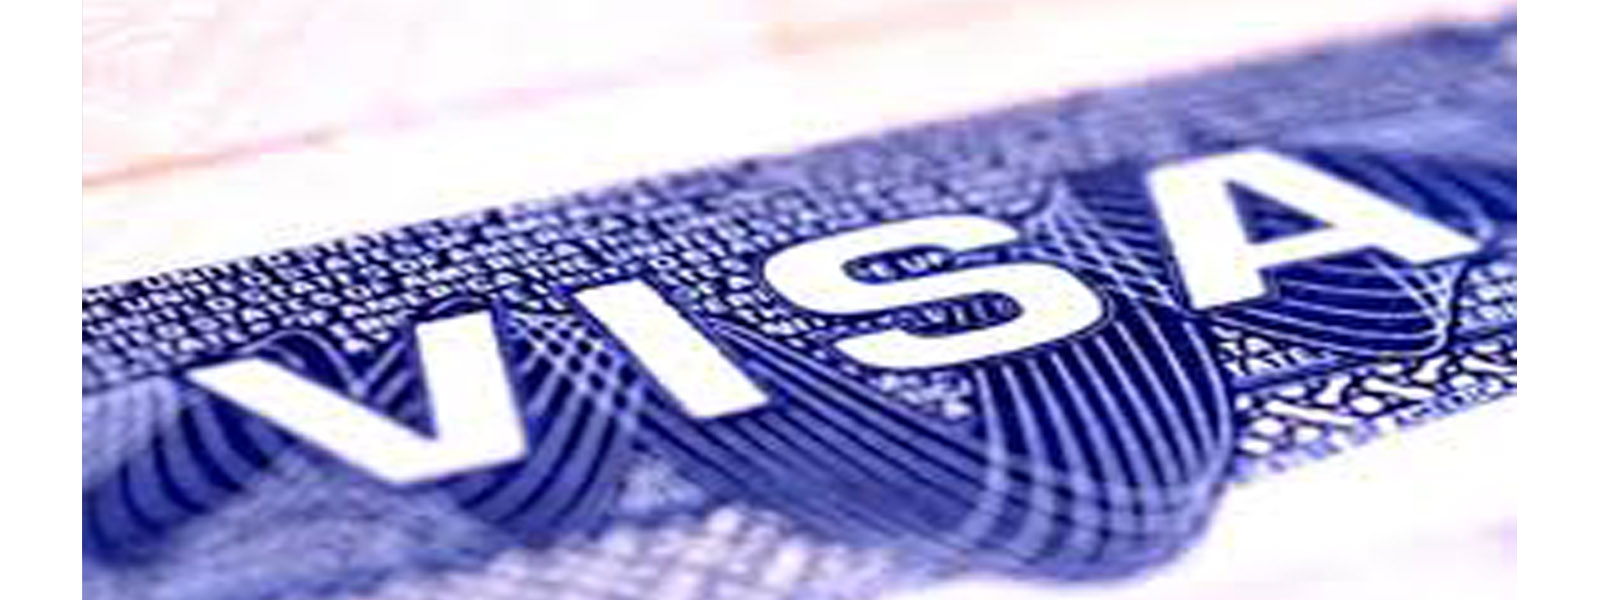 USD 500 to be fined from immigrants with no Visa 